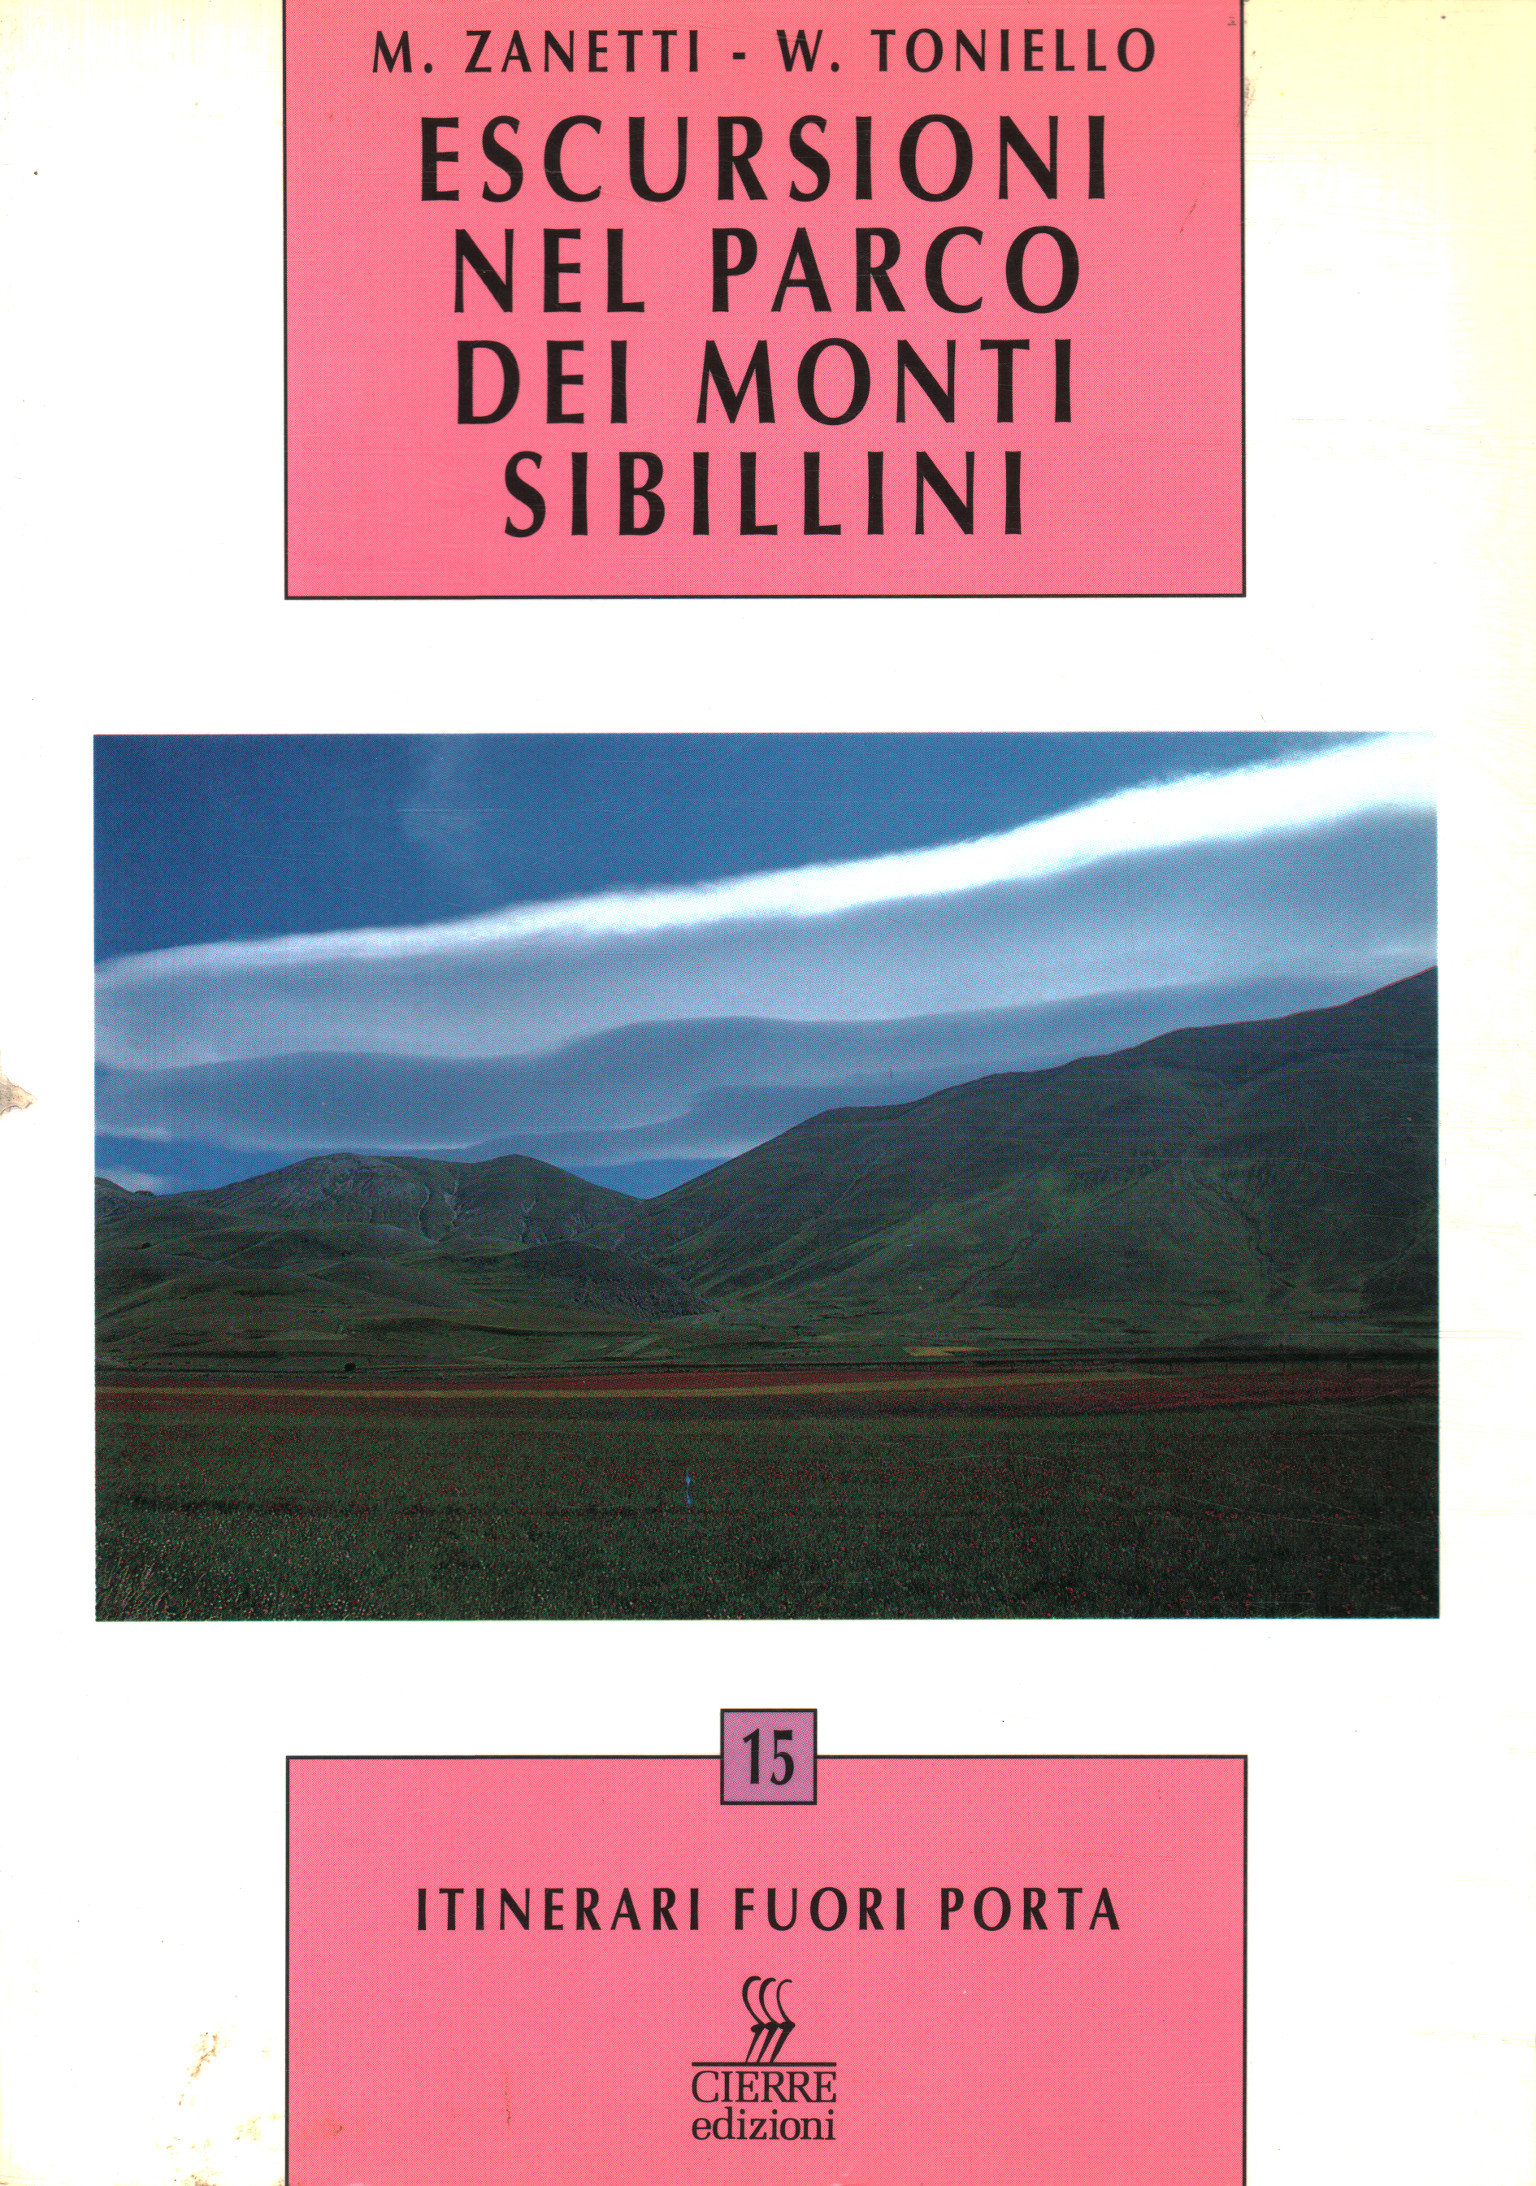 Excursions in the park of the Sibillini mountains